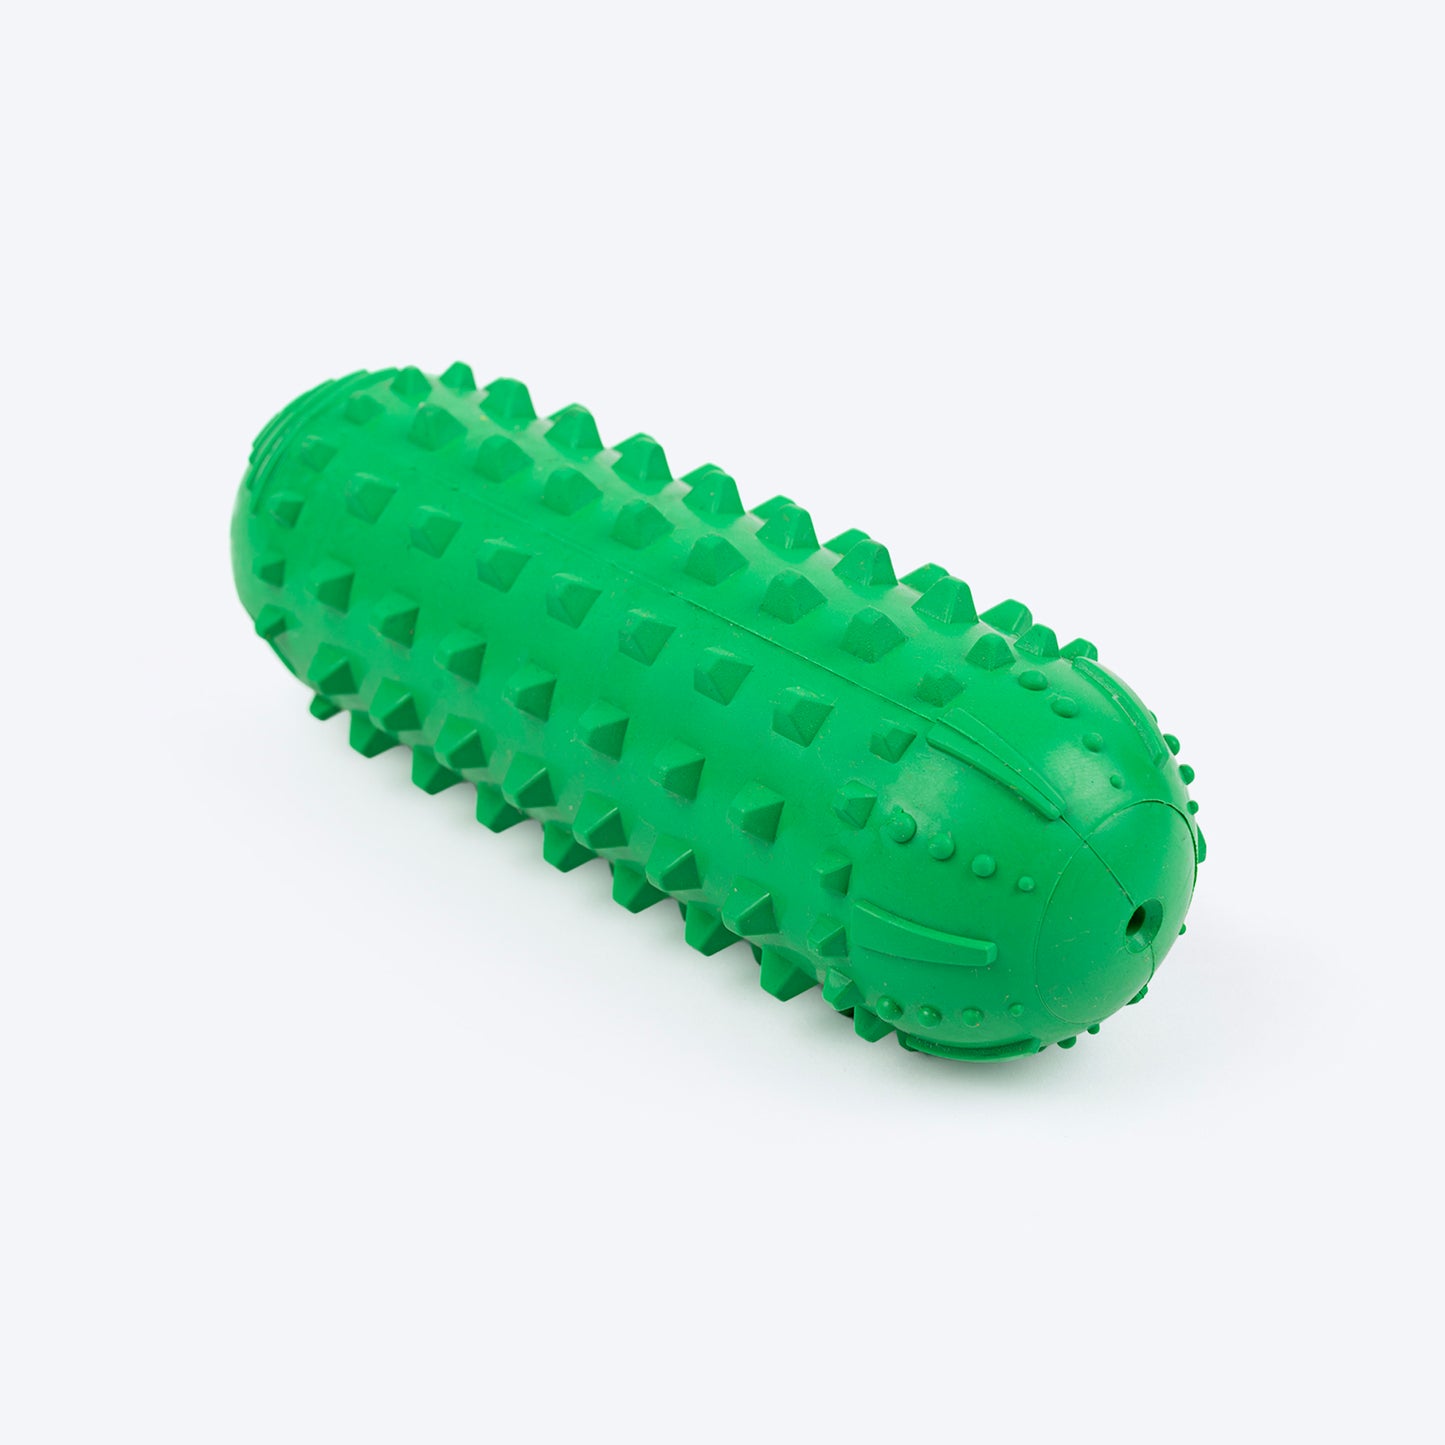 HUFT Squeak-N-Chew Cruiser Toy For Dog - Green - Heads Up For Tails